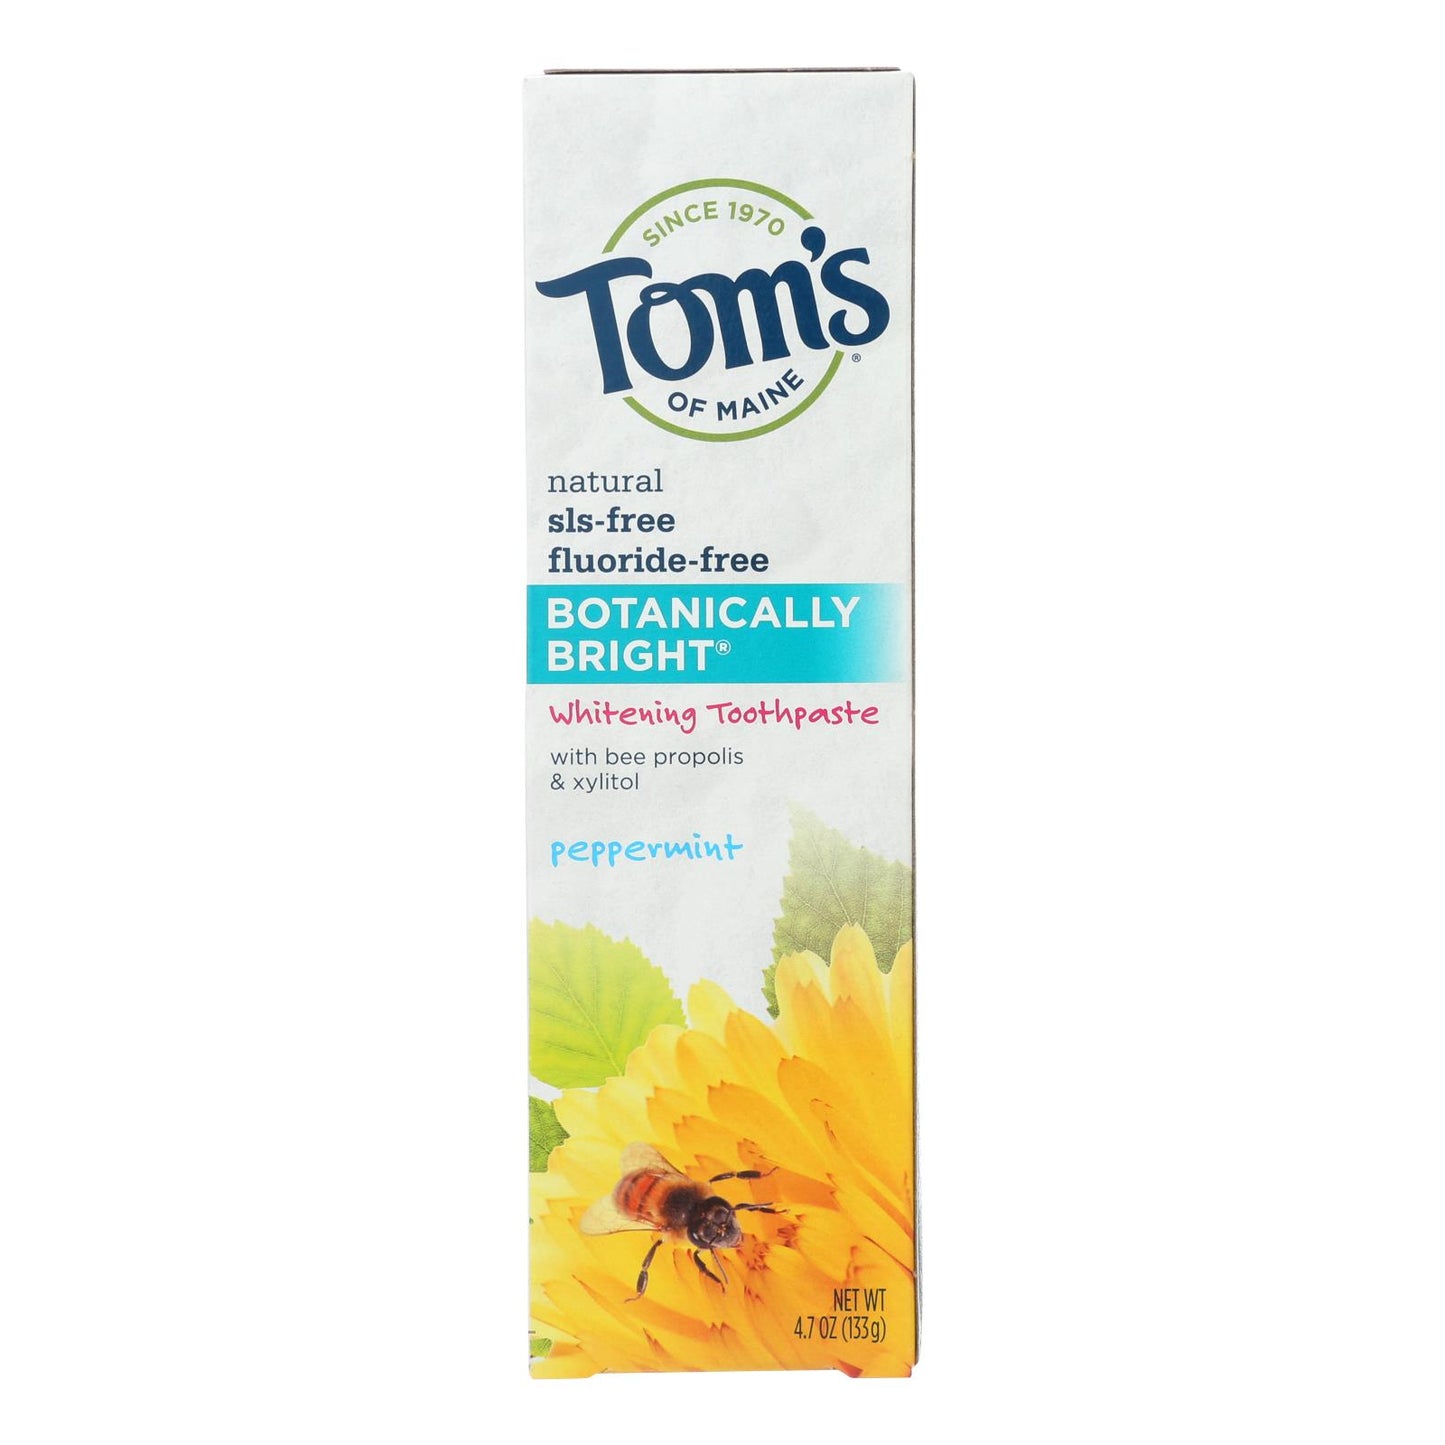 Tom's Of Maine Botanically Bright Whitening Toothpaste Peppermint - 4.7 Oz - Case Of 6